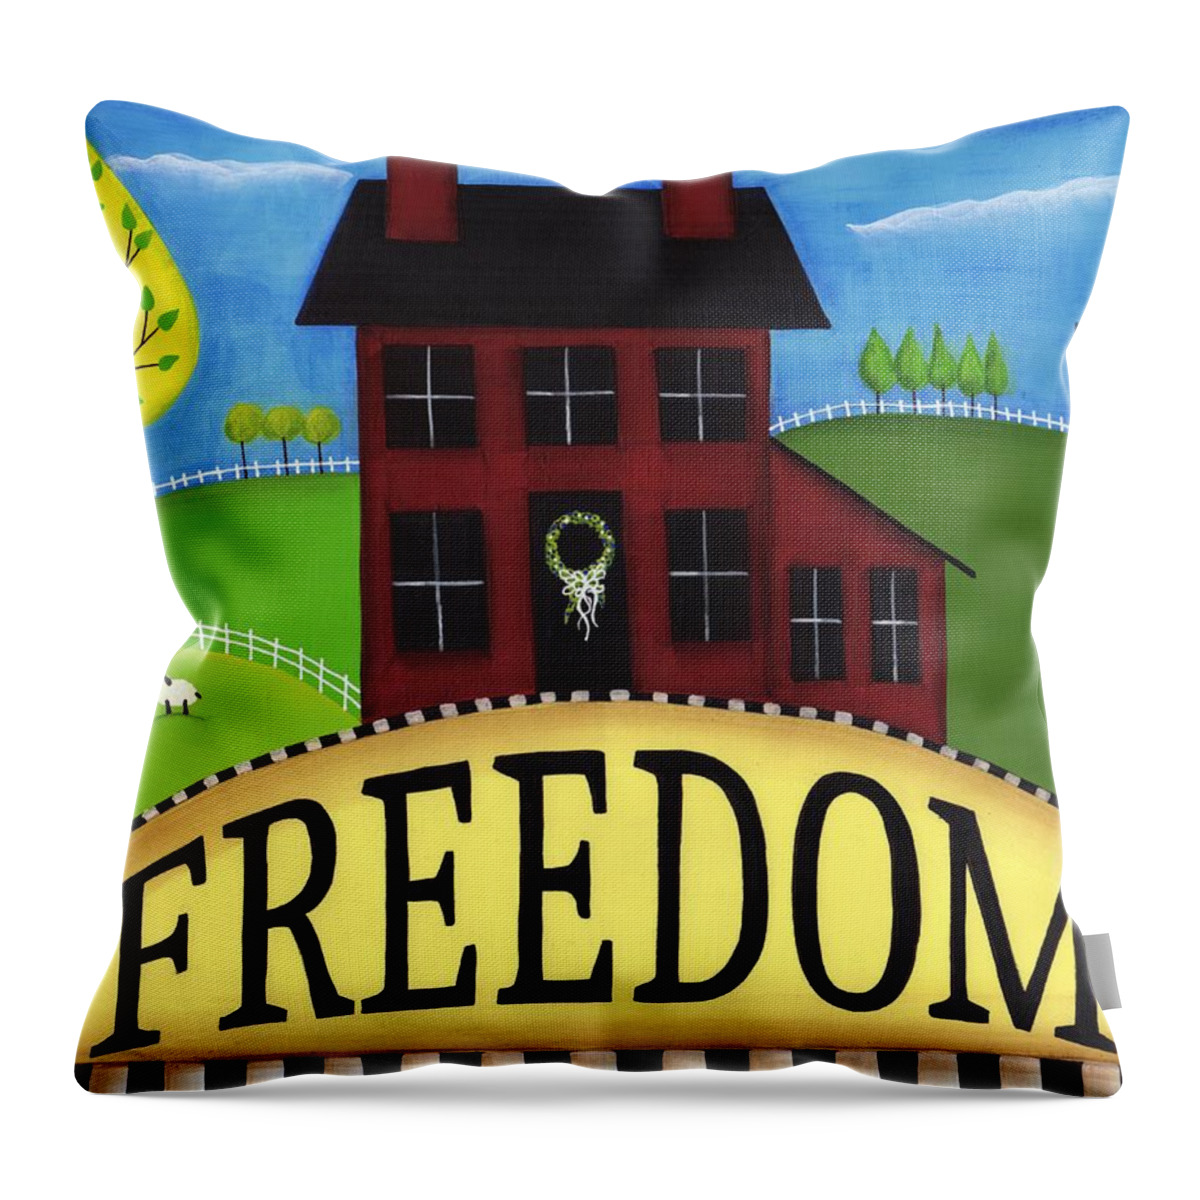 July Fourth Throw Pillow featuring the mixed media Freedom by Clover Moon Designs Peggy Sowers-Heckman